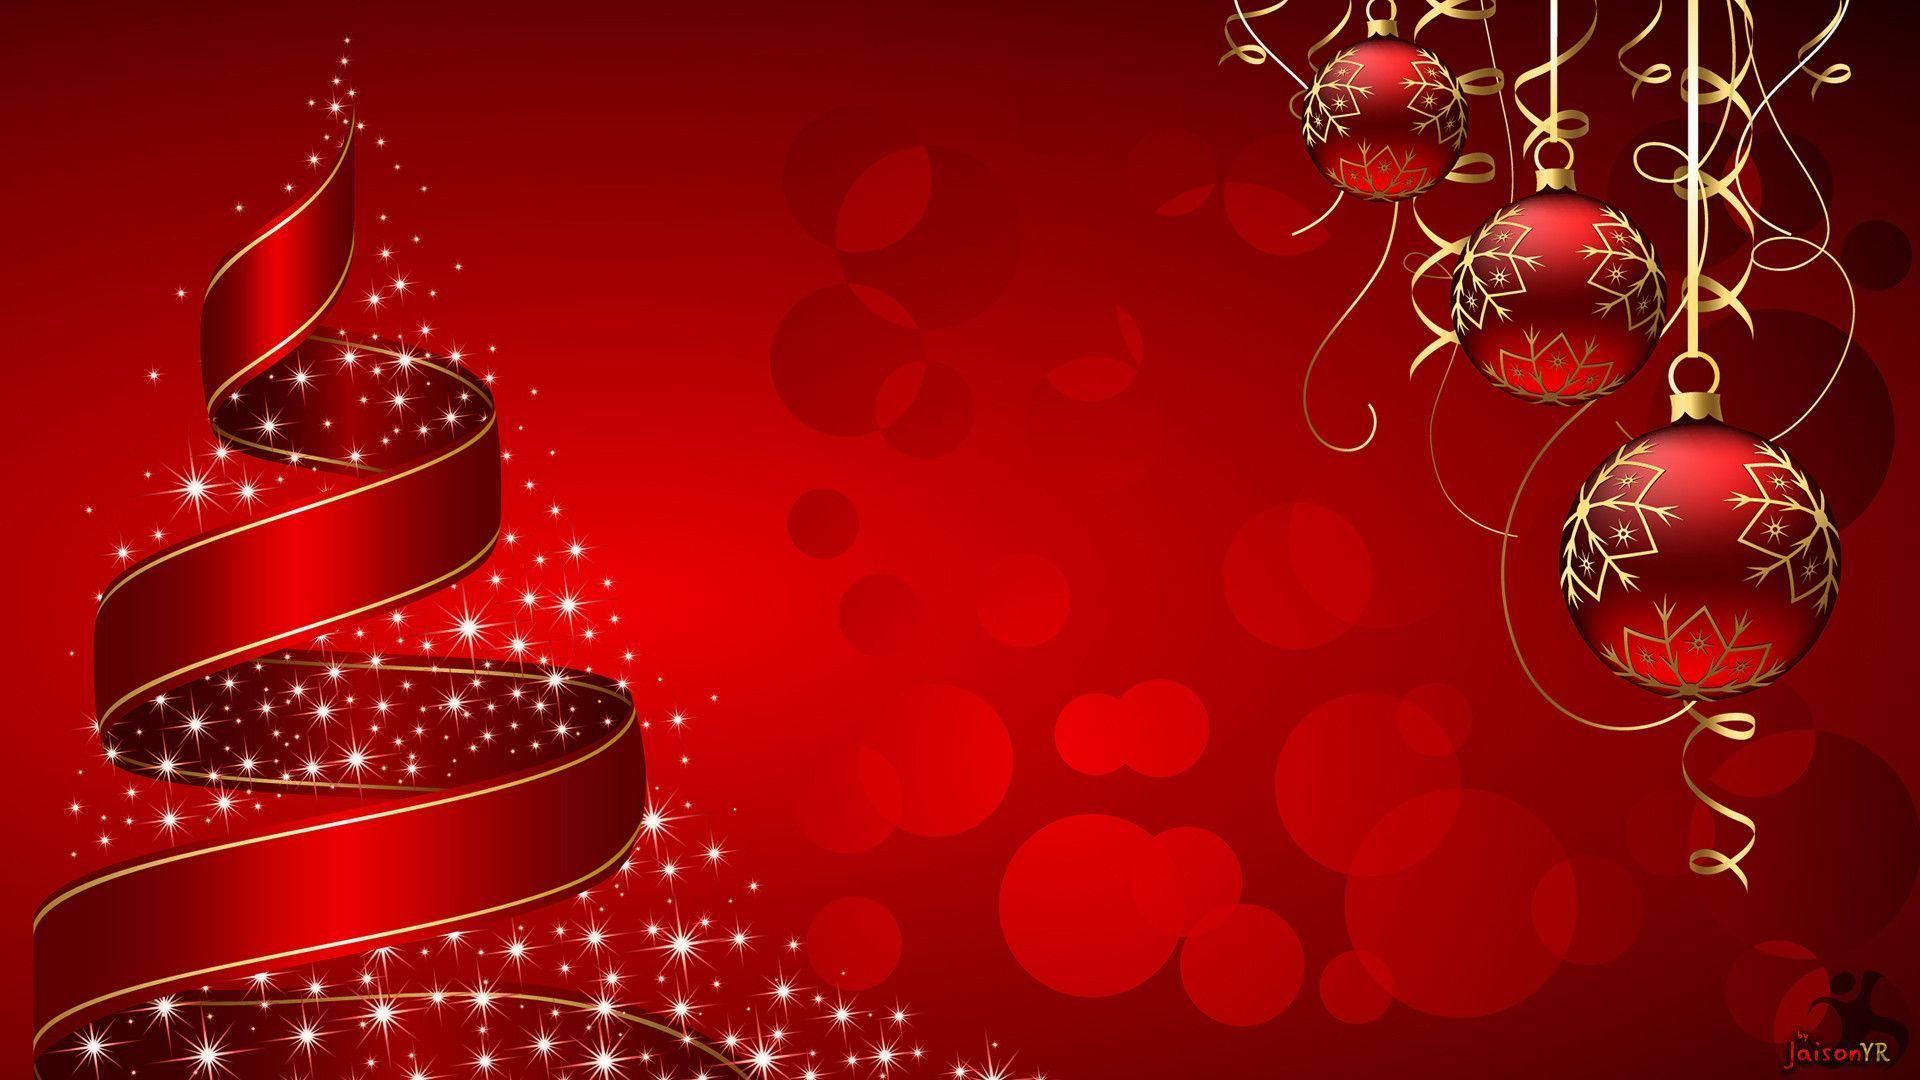 Download Merry Christmas Favourite Desktop Background. HD